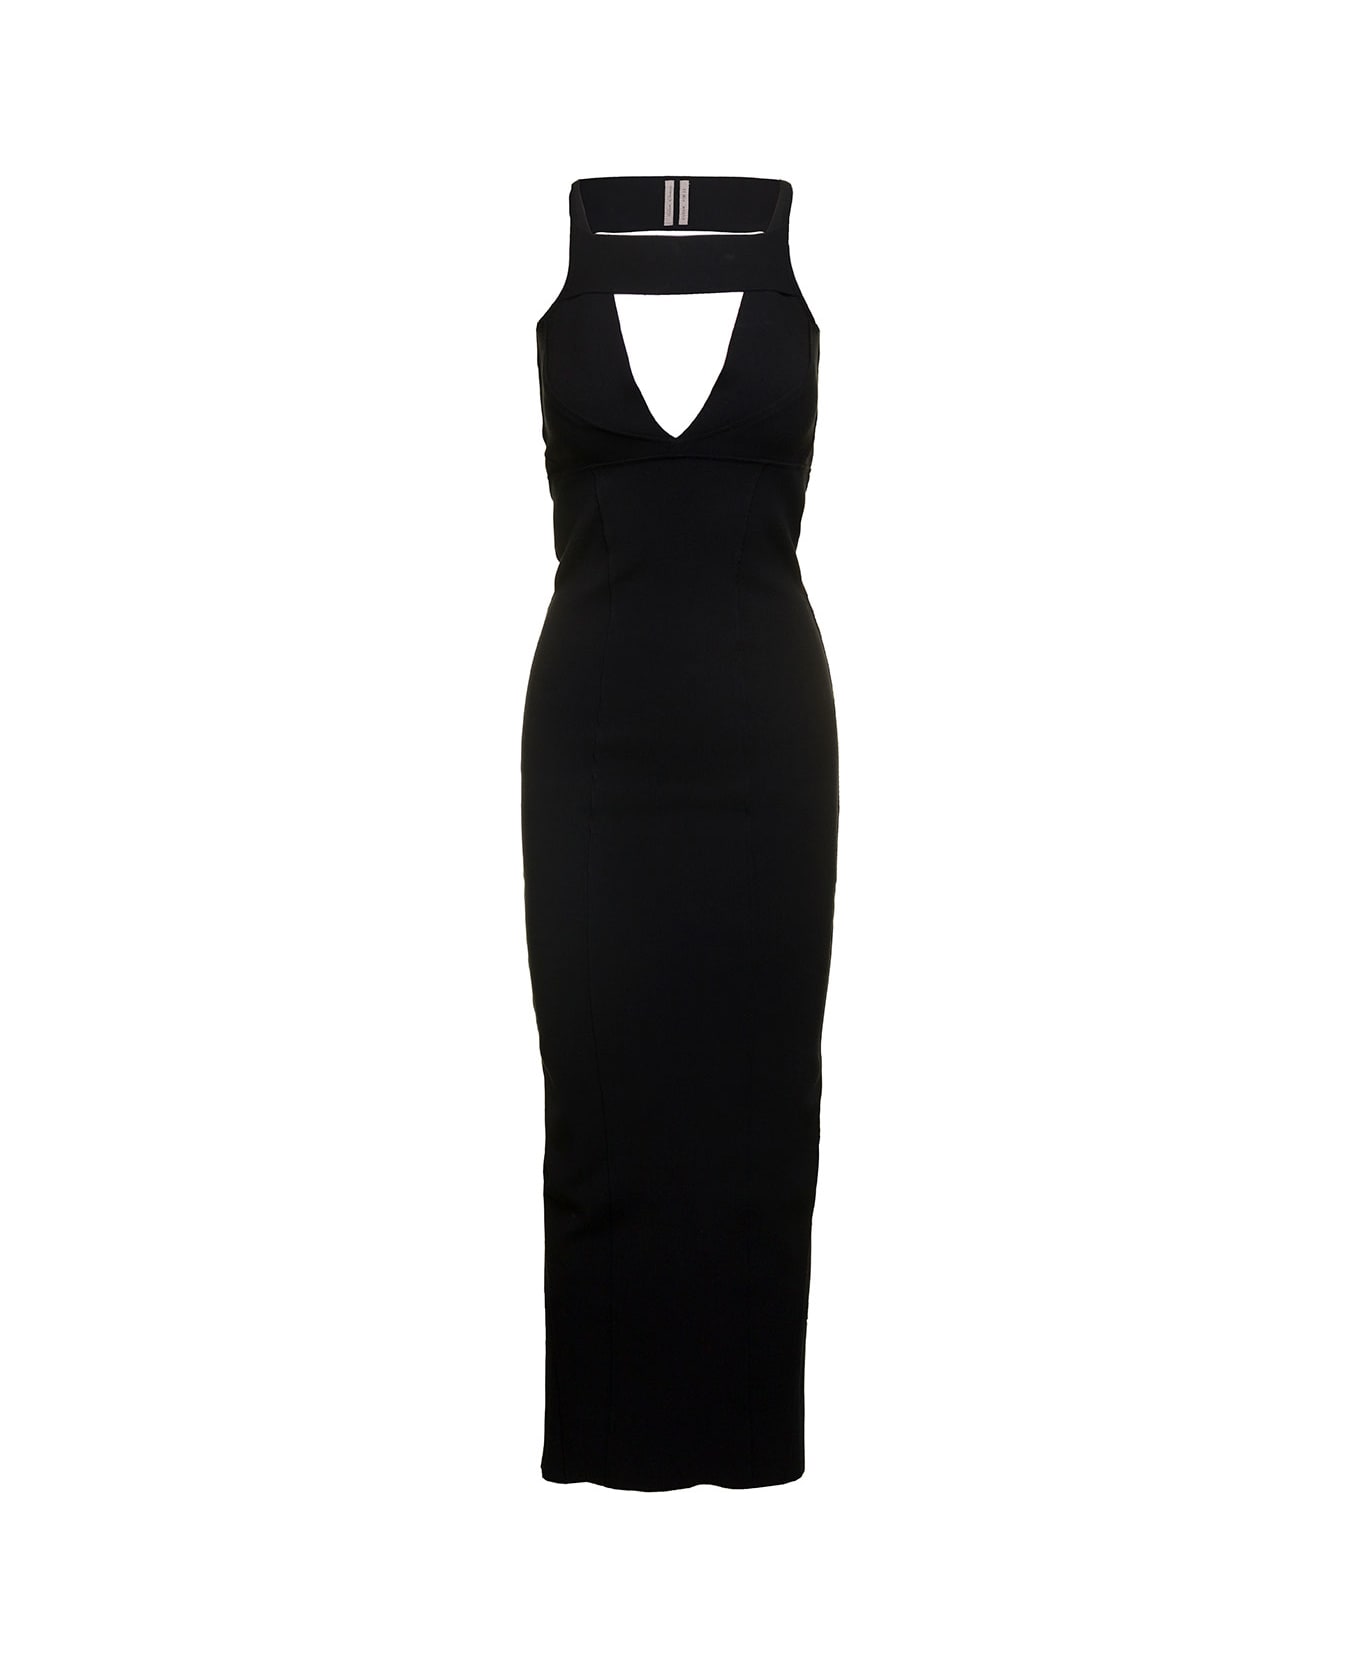 Rick Owens Maxi Black Dress With Cut-out In Viscose Blend Woman - Black ワンピース＆ドレス